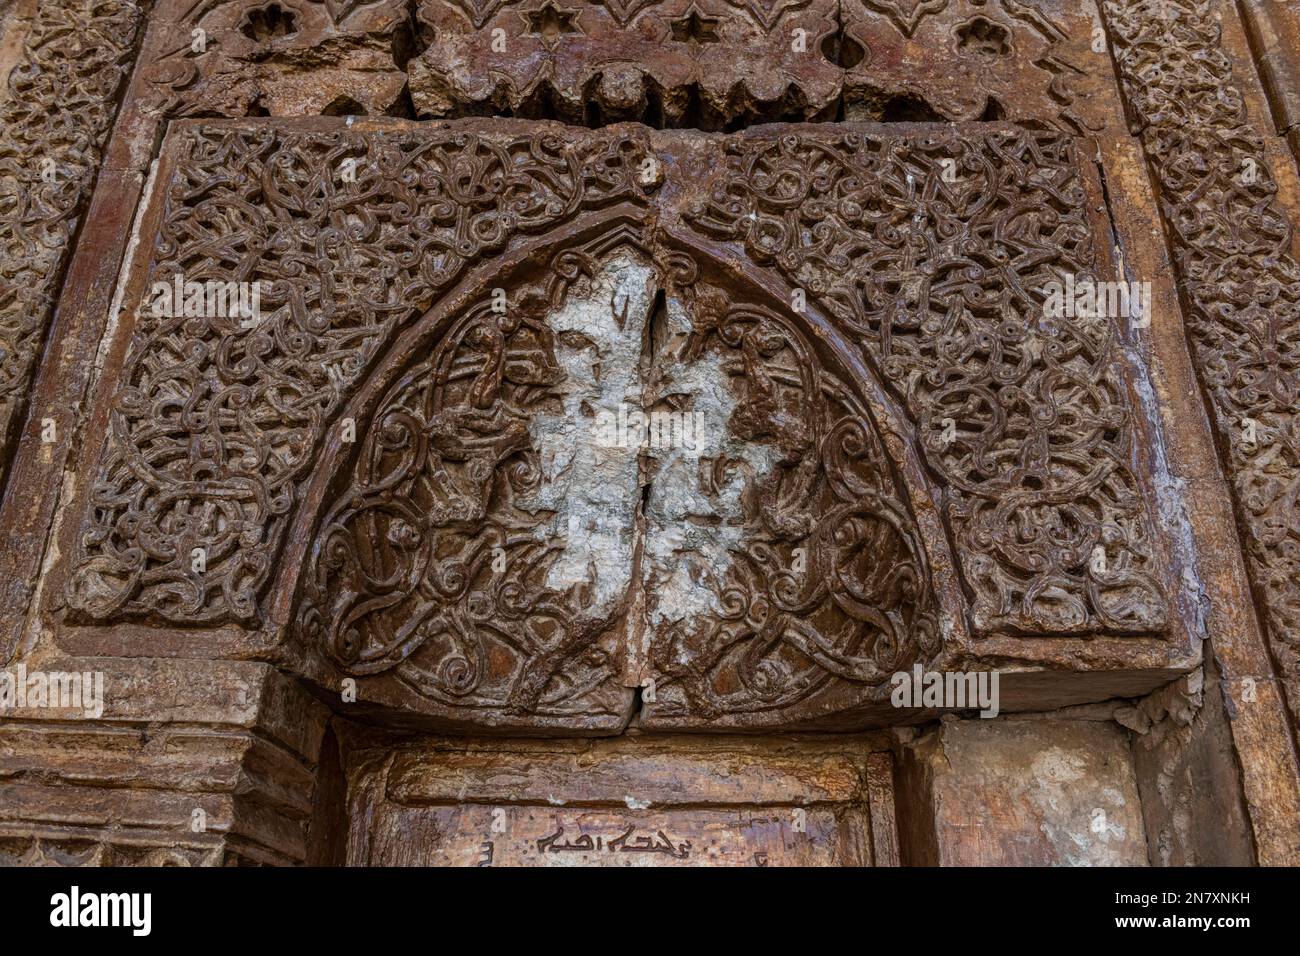 From ISIS removed christian symbols, SSaint Mar Behnam monastery, northern Iraq Stock Photo